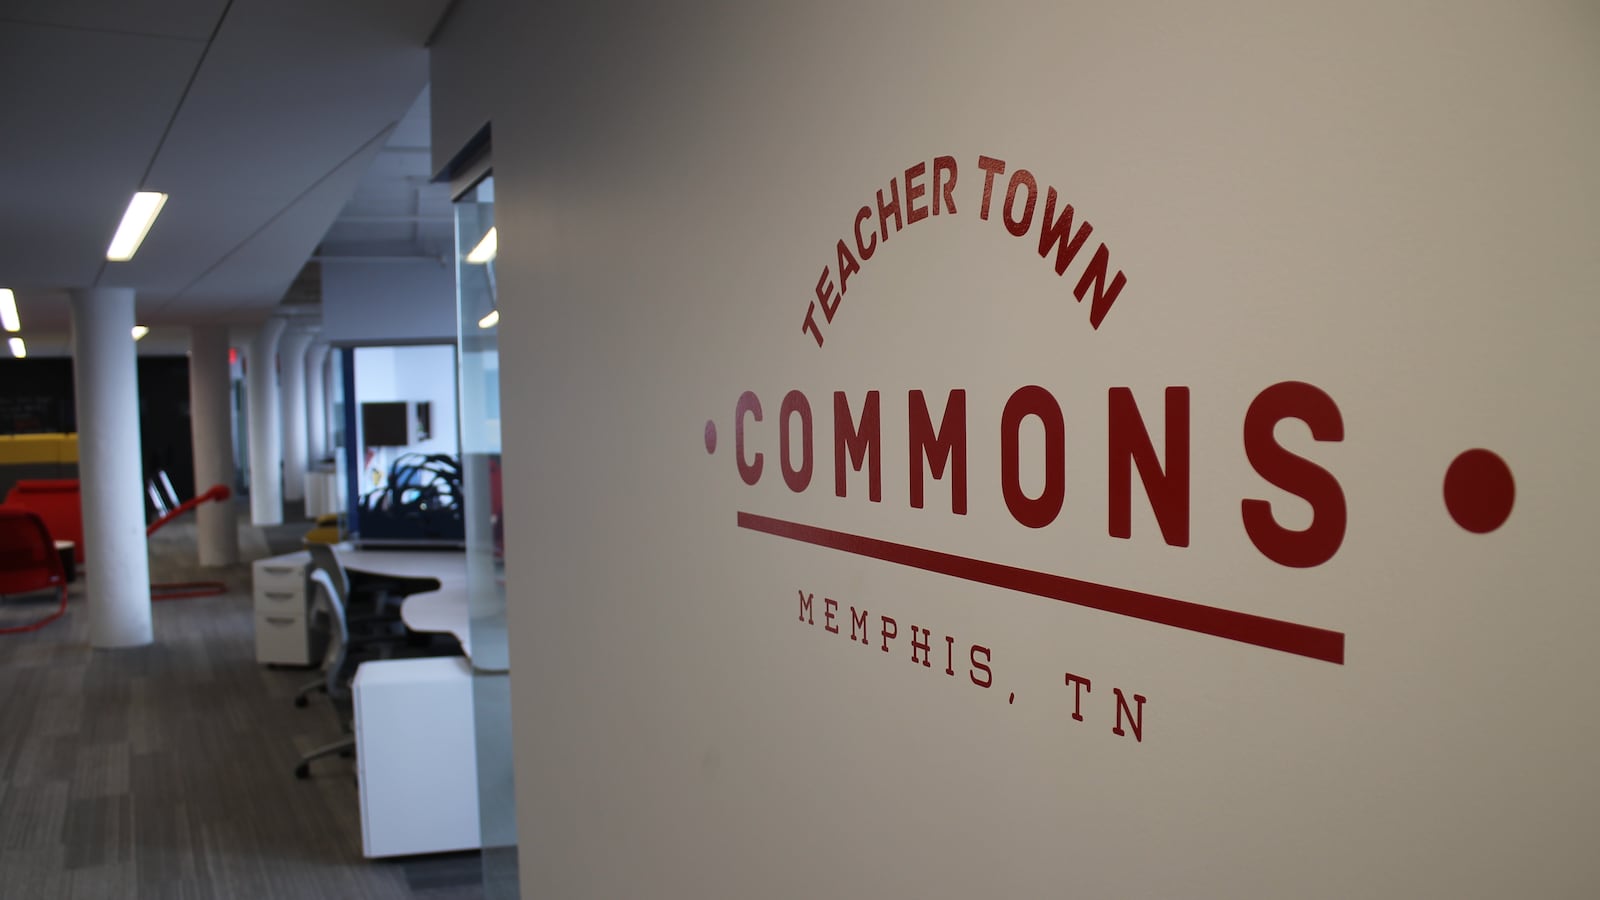 Offices for Memphis Education Fund collaborators are housed in a downtown Memphis building known as Teacher Town Commons.